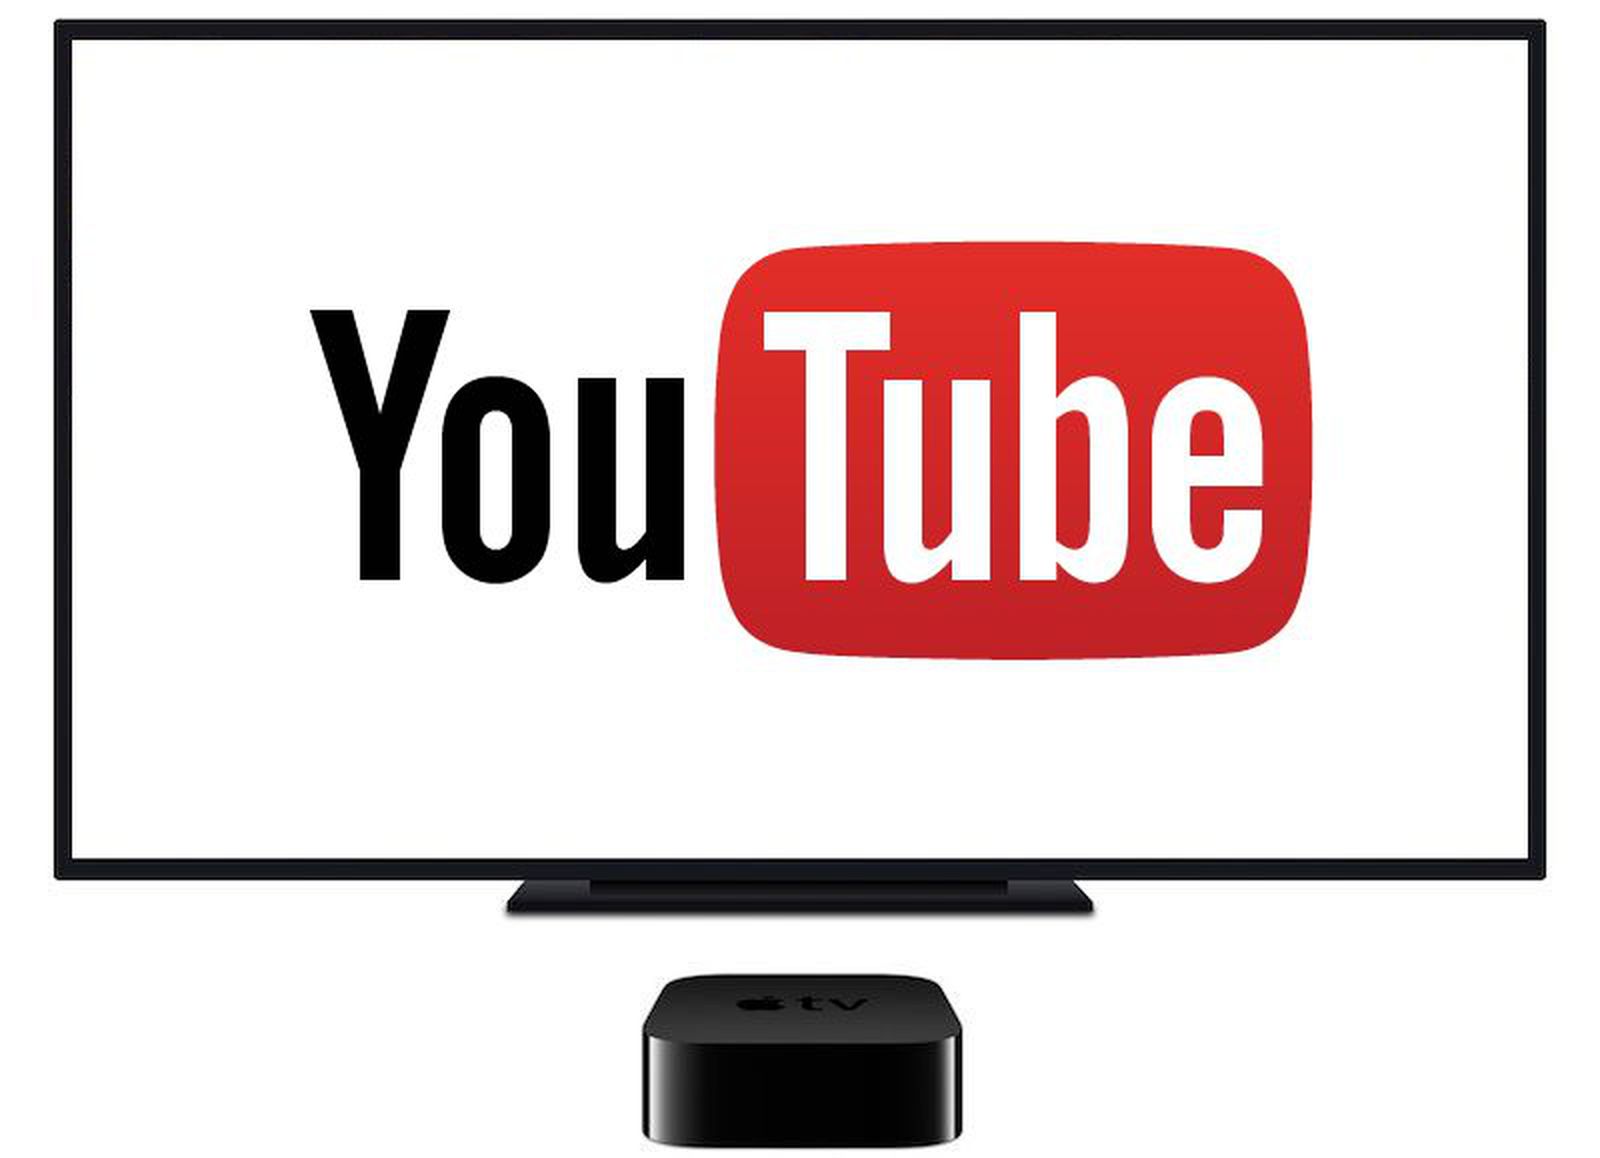 YouTube stops third generation Apple TV app, AirPlay still available